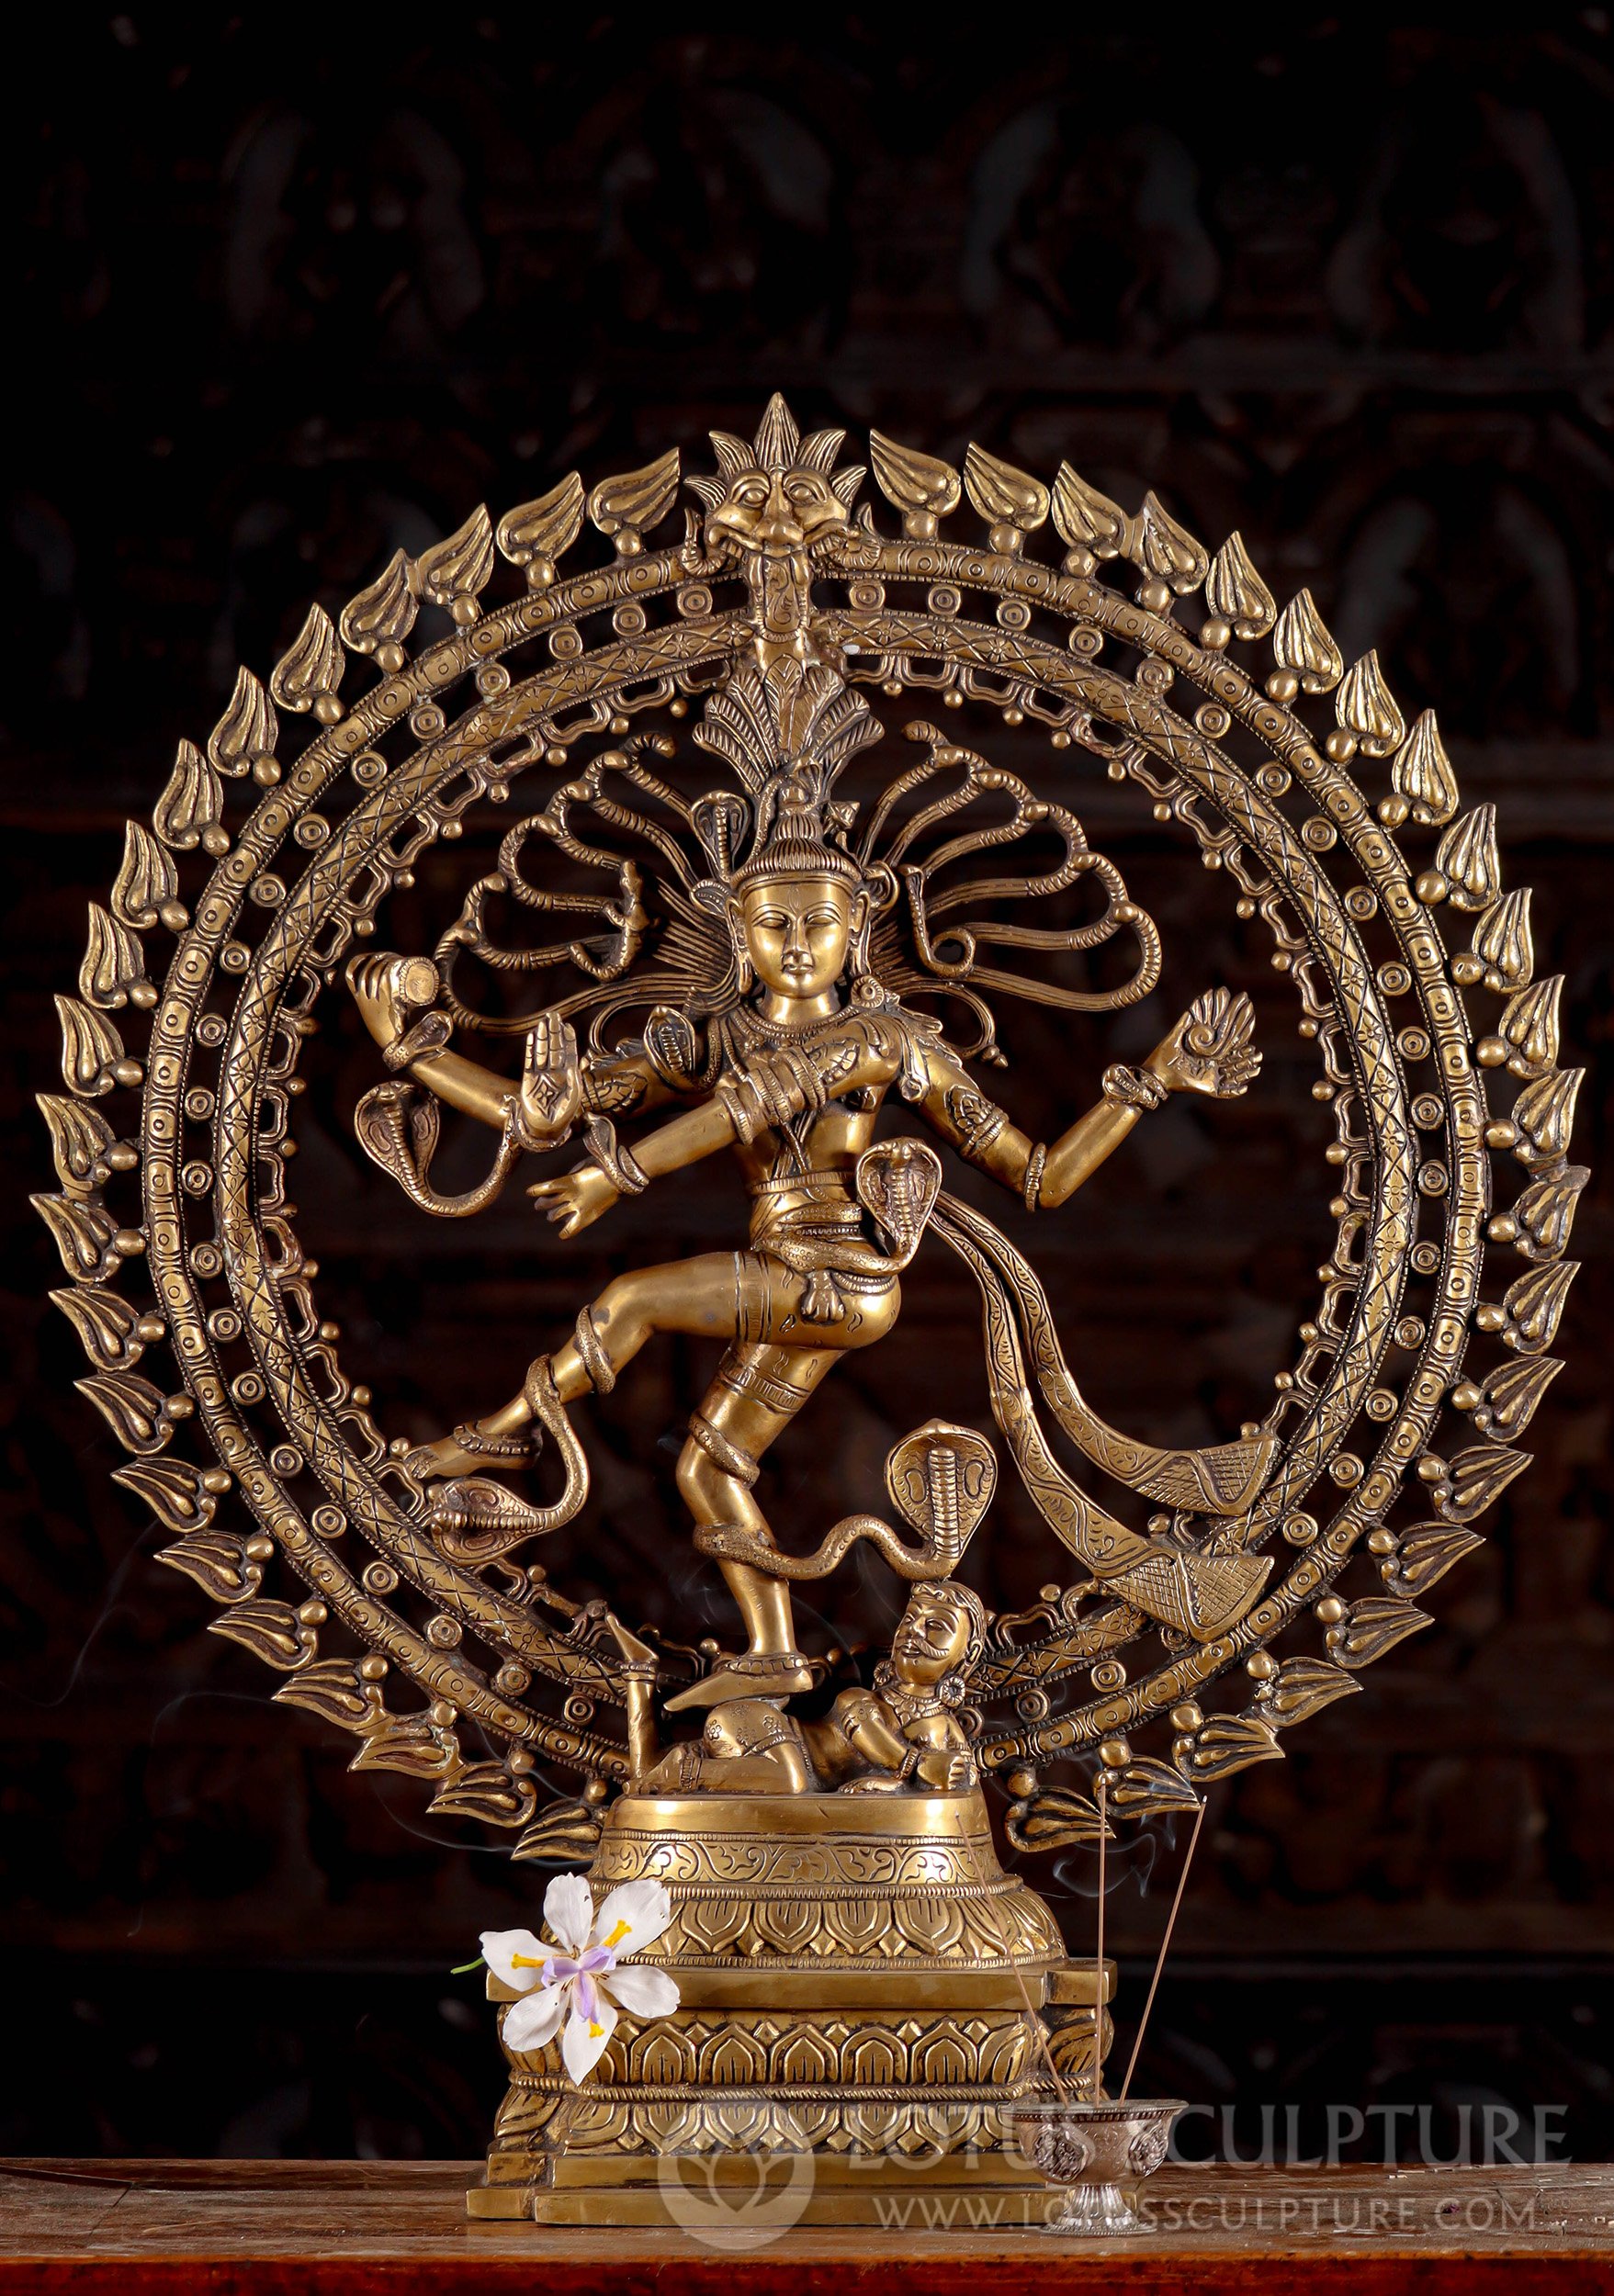 Story Of 28-Feet-Tall Nataraja Statue That Greeted World Leaders